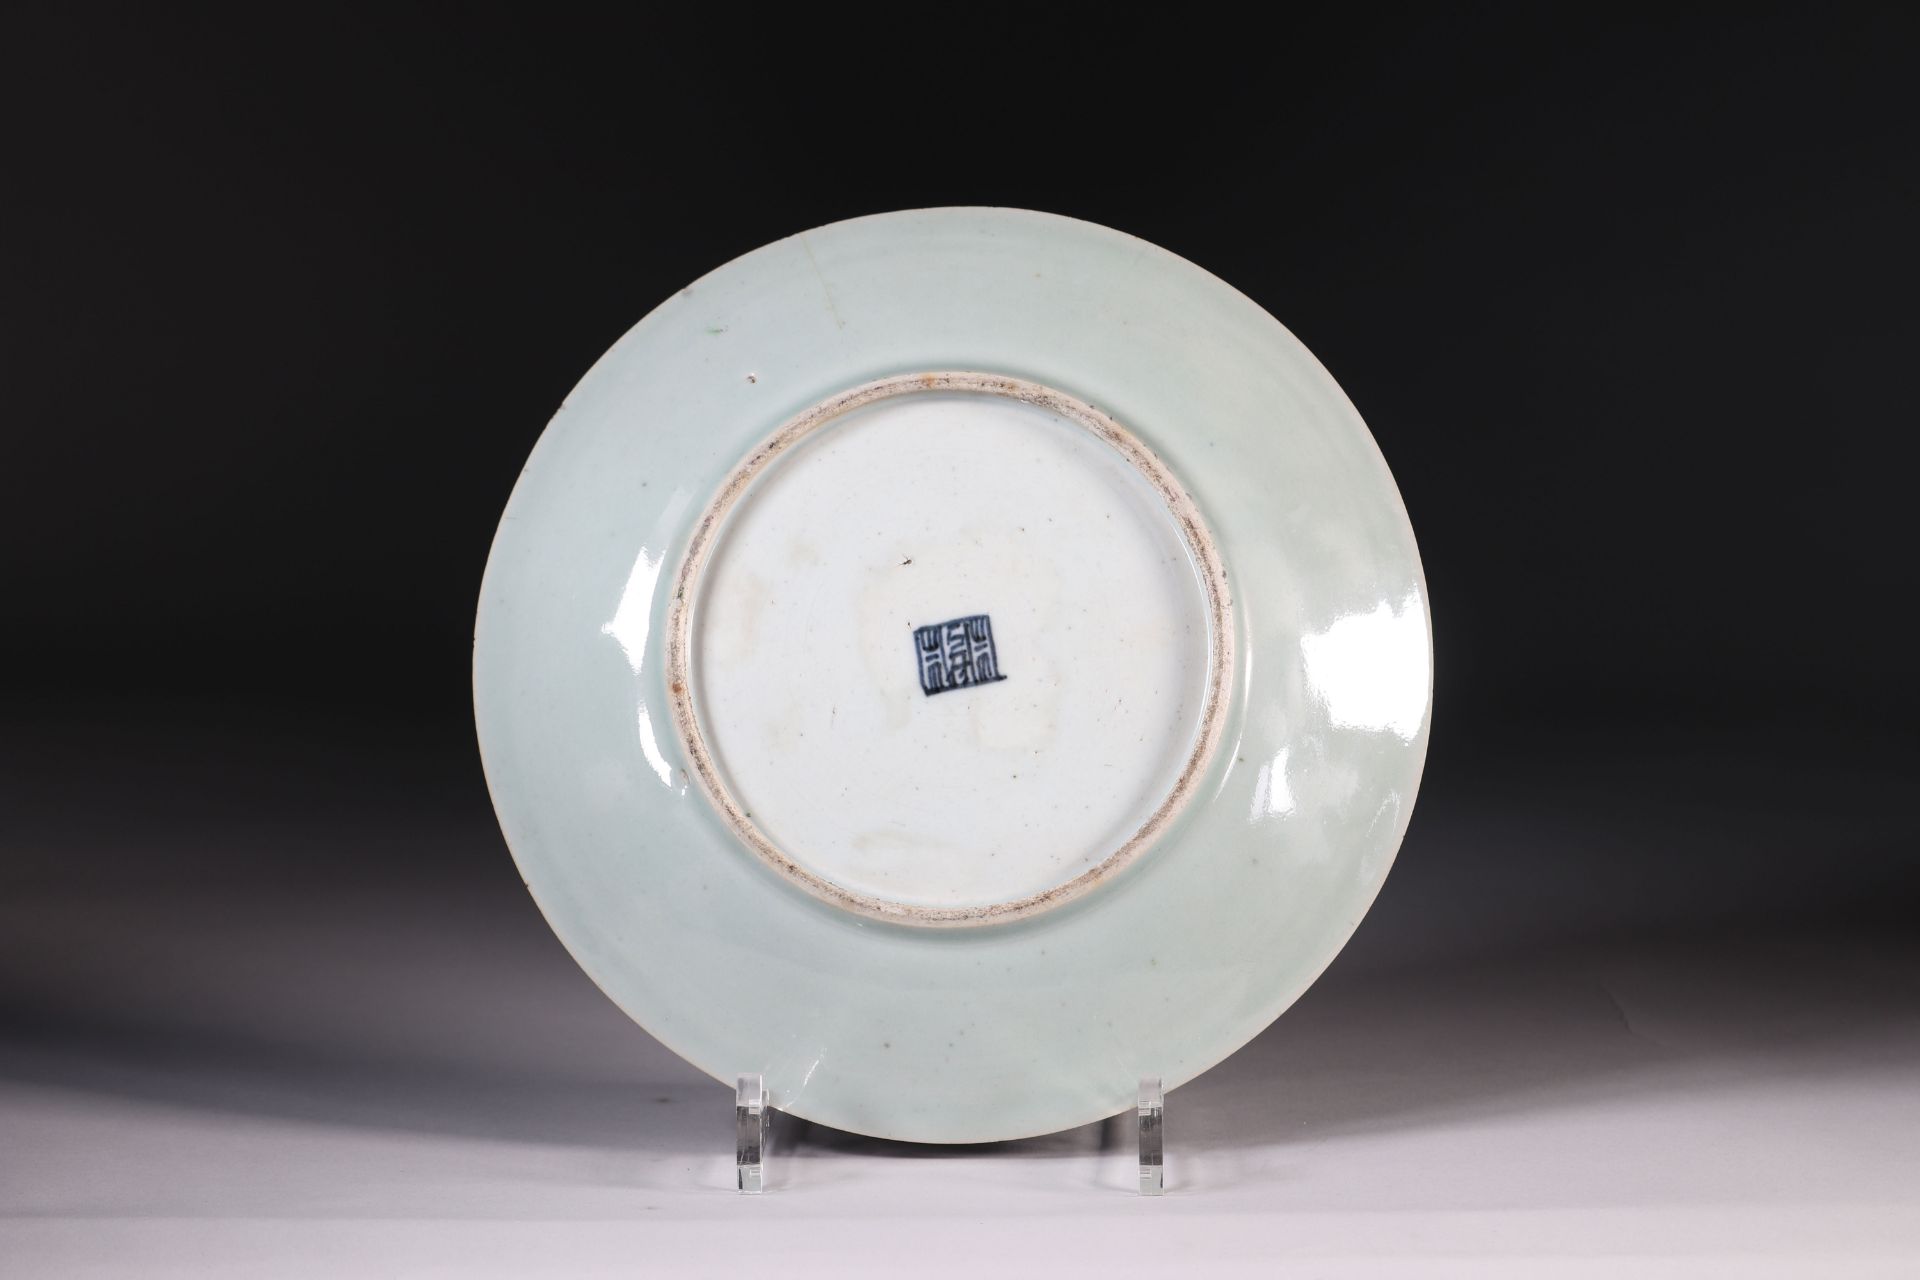 China Canton Porcelain Plate 19th - Image 2 of 2